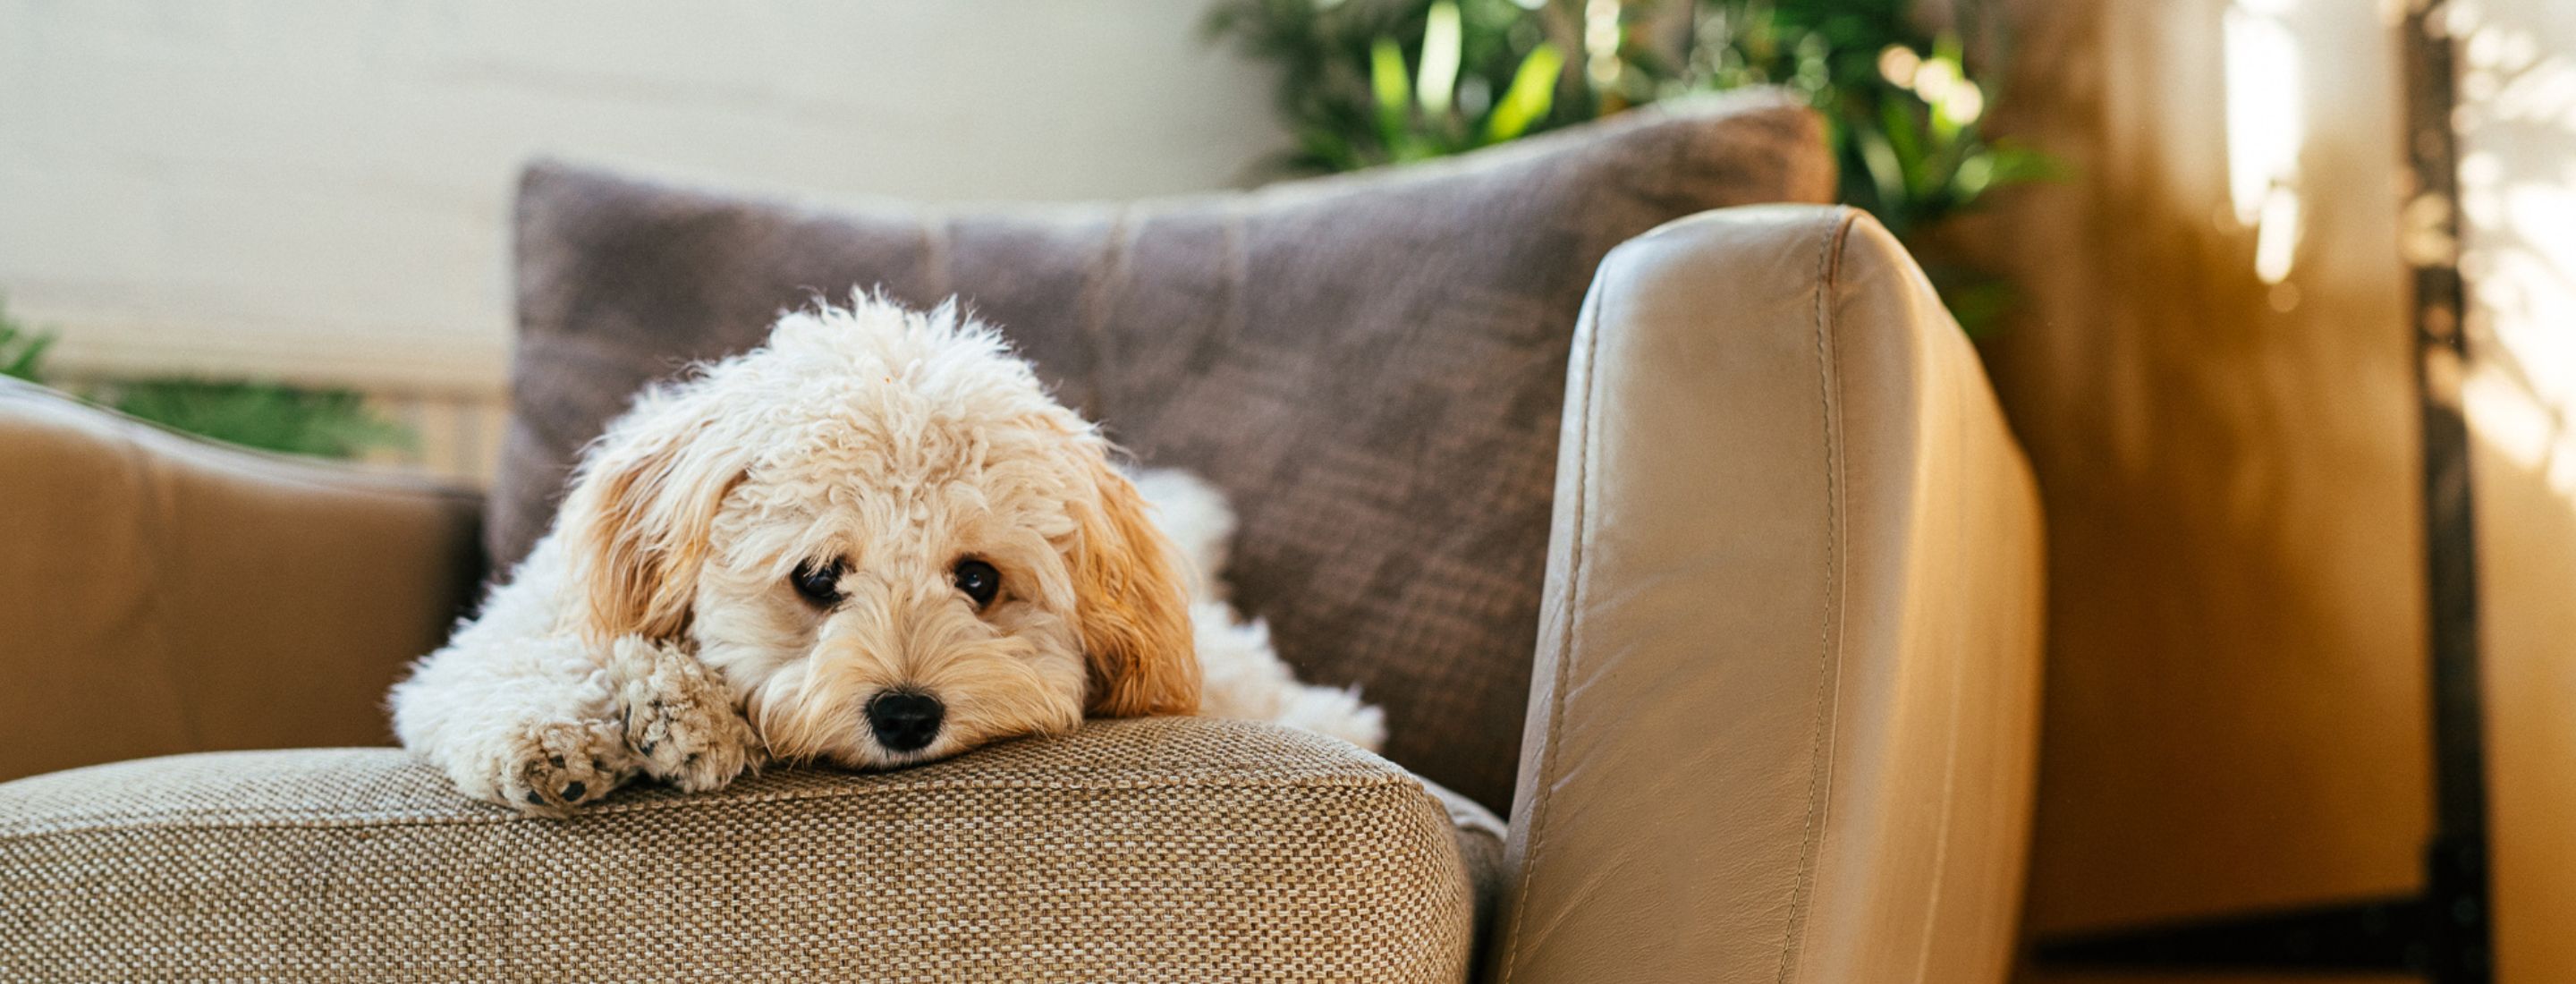 Home activities on rainy days｜Burn your dog's energy with indoor activities